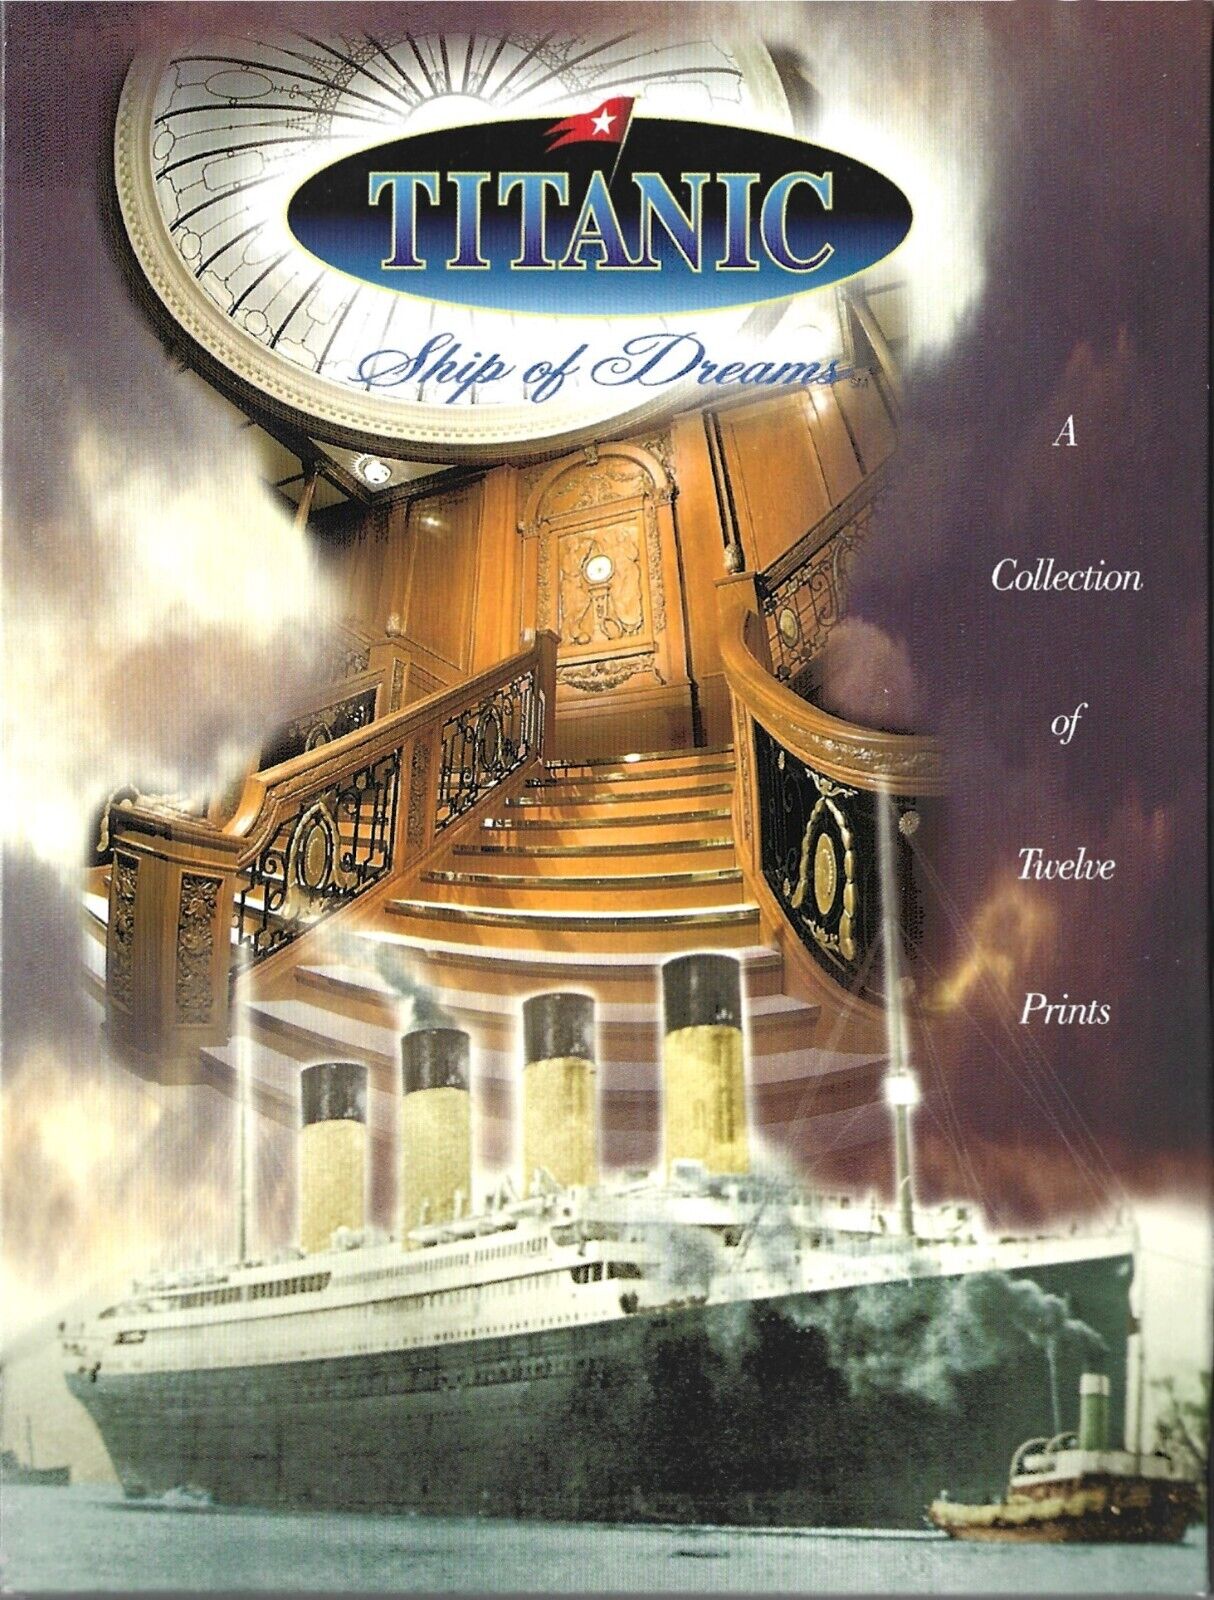 The Titanic Ship Of Dreams Set Of Twelve Postcard Prints By The Postcard Factory